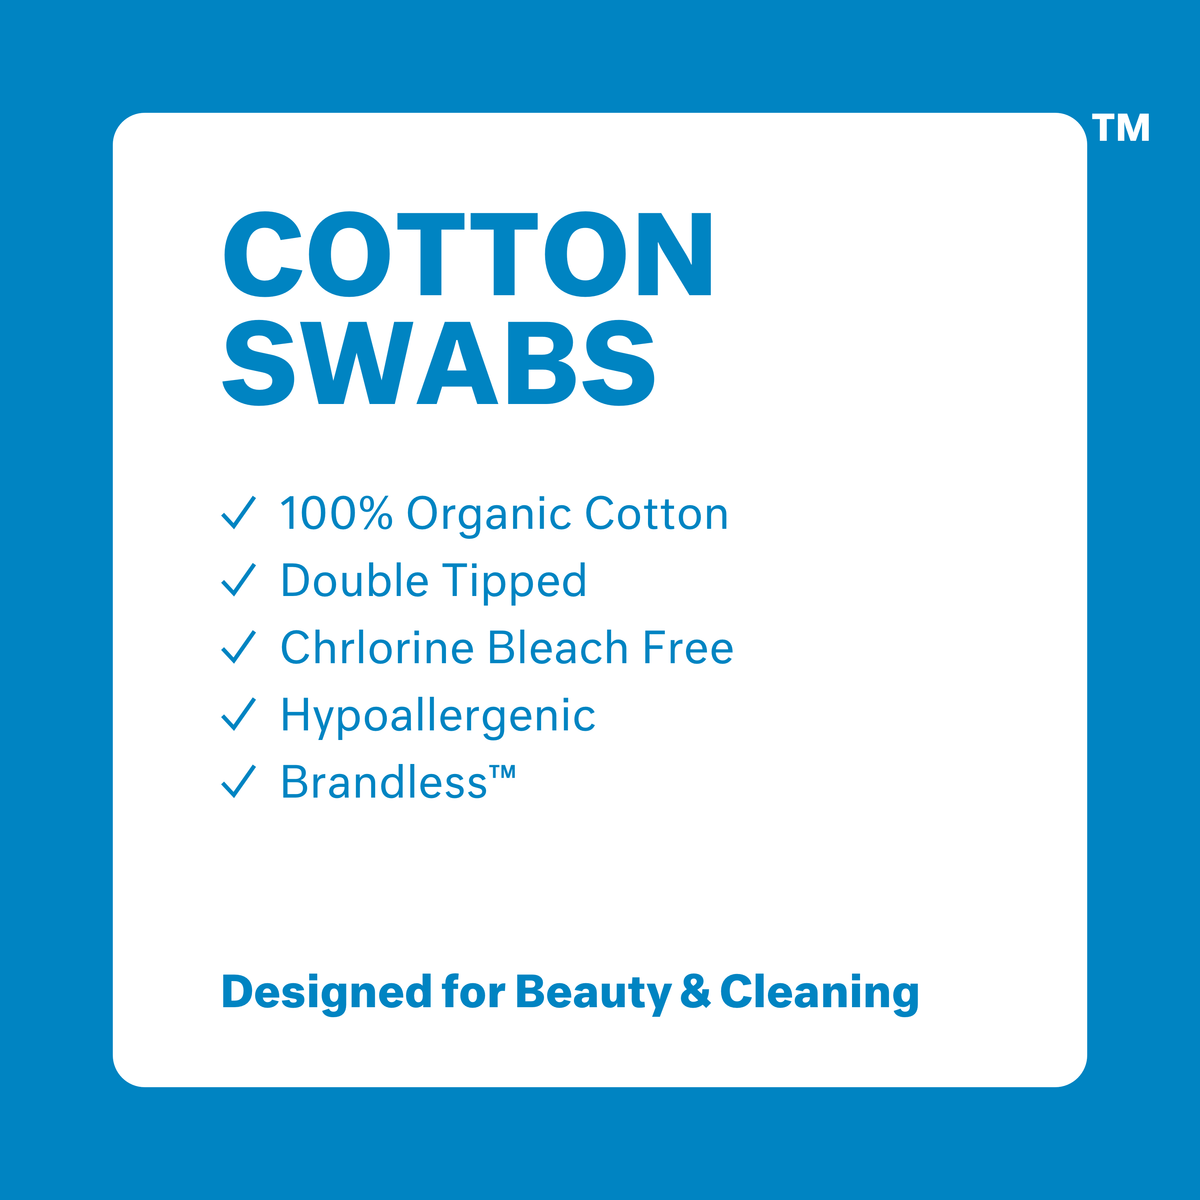 Cotton Swabs. 100% organic cotton. double tipped. chlorine bleach free. hypoallergenic. Brandless. Designed for beauty and cleaning.